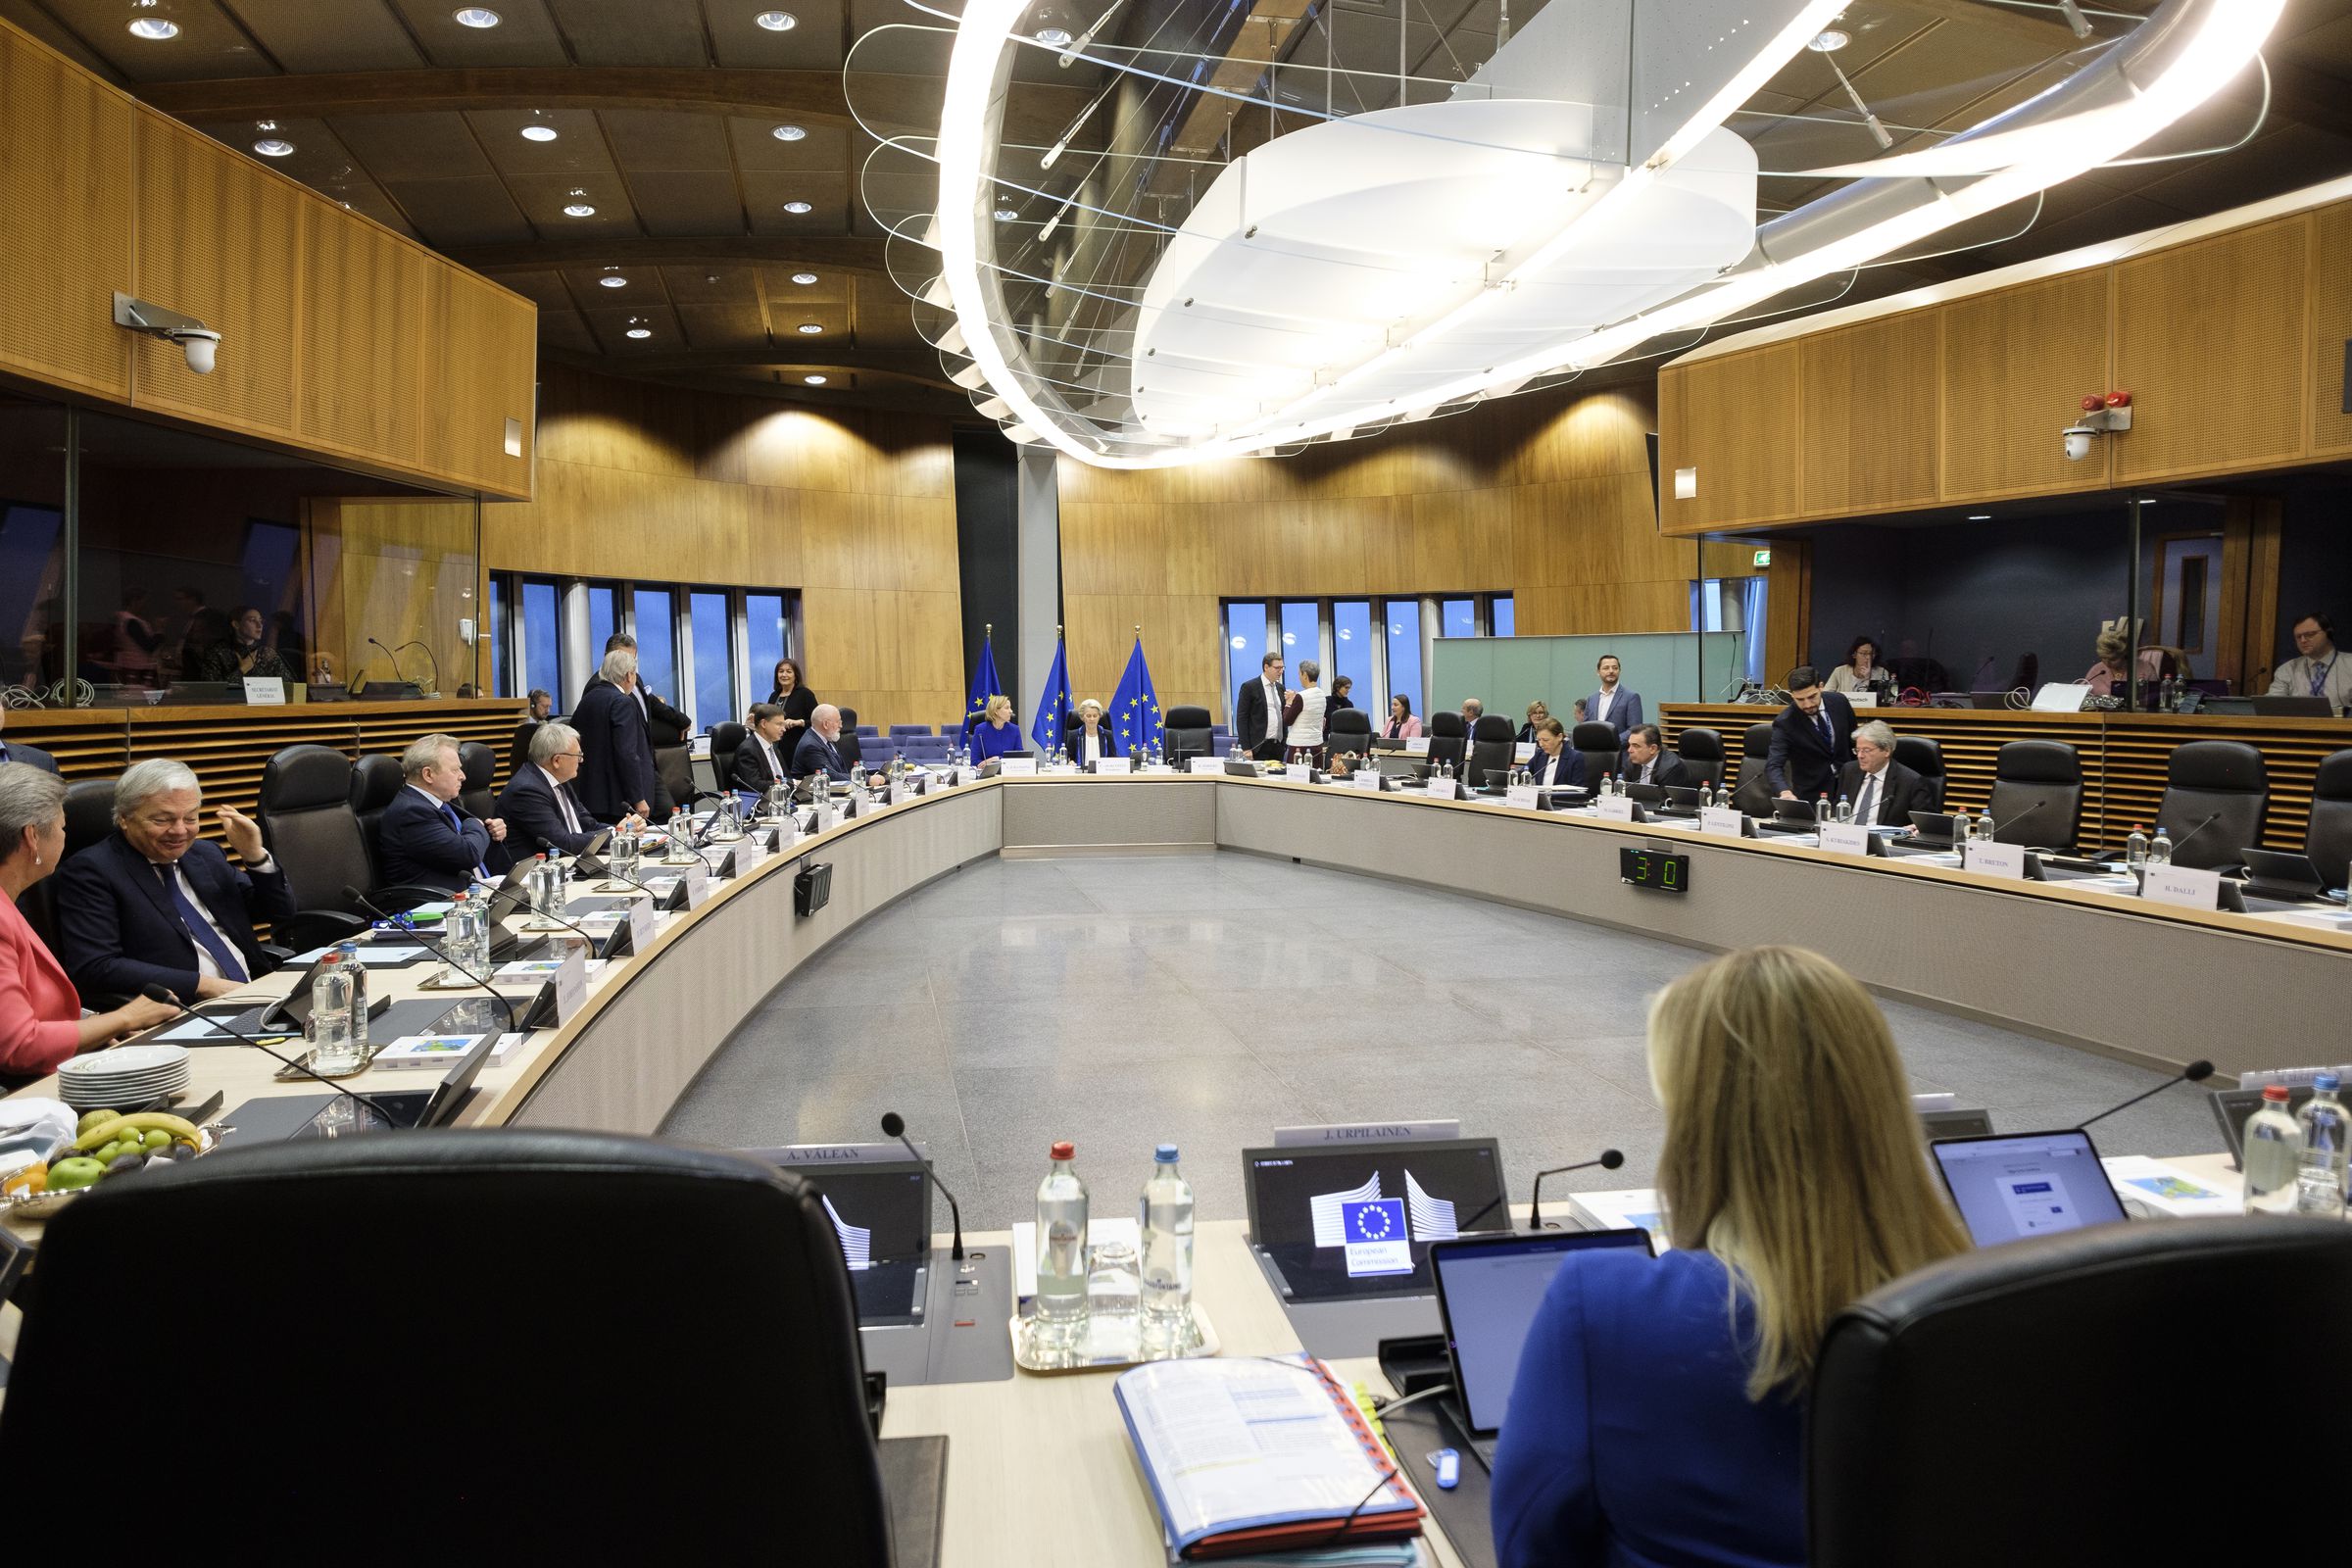 Members of the EU Commission sit around tables inside a meeting room.